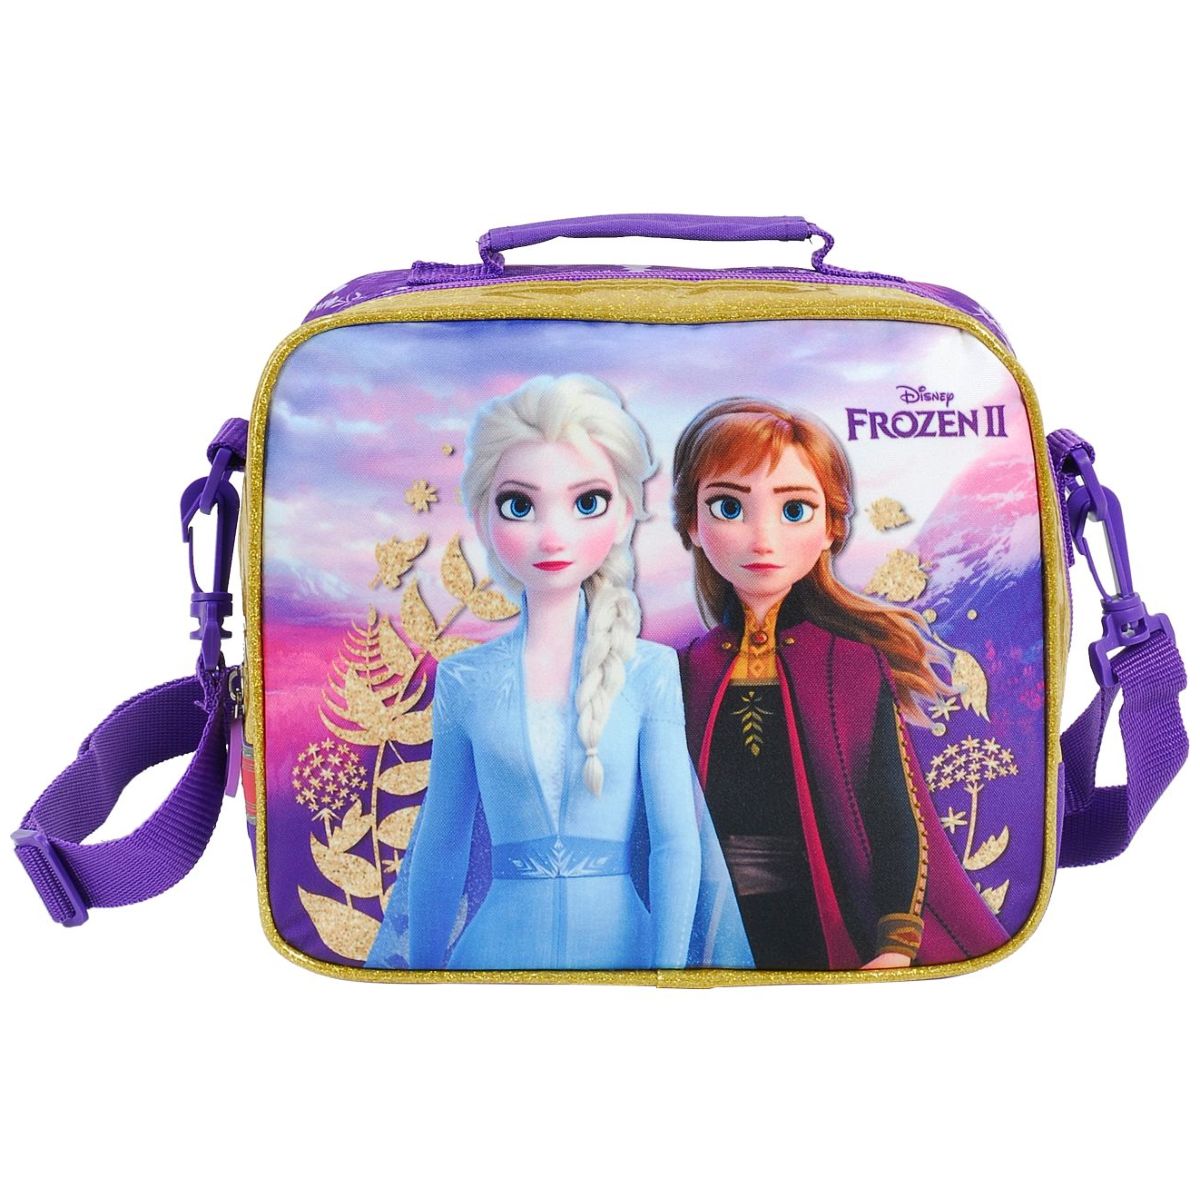 and More for Boys Girls Kids Disney Frozen Lunch Box Travel Activity Set Games Stickers Frozen School Supplies Bundle Insulated Frozen Lunch Bag with Frozen Coloring Pack 